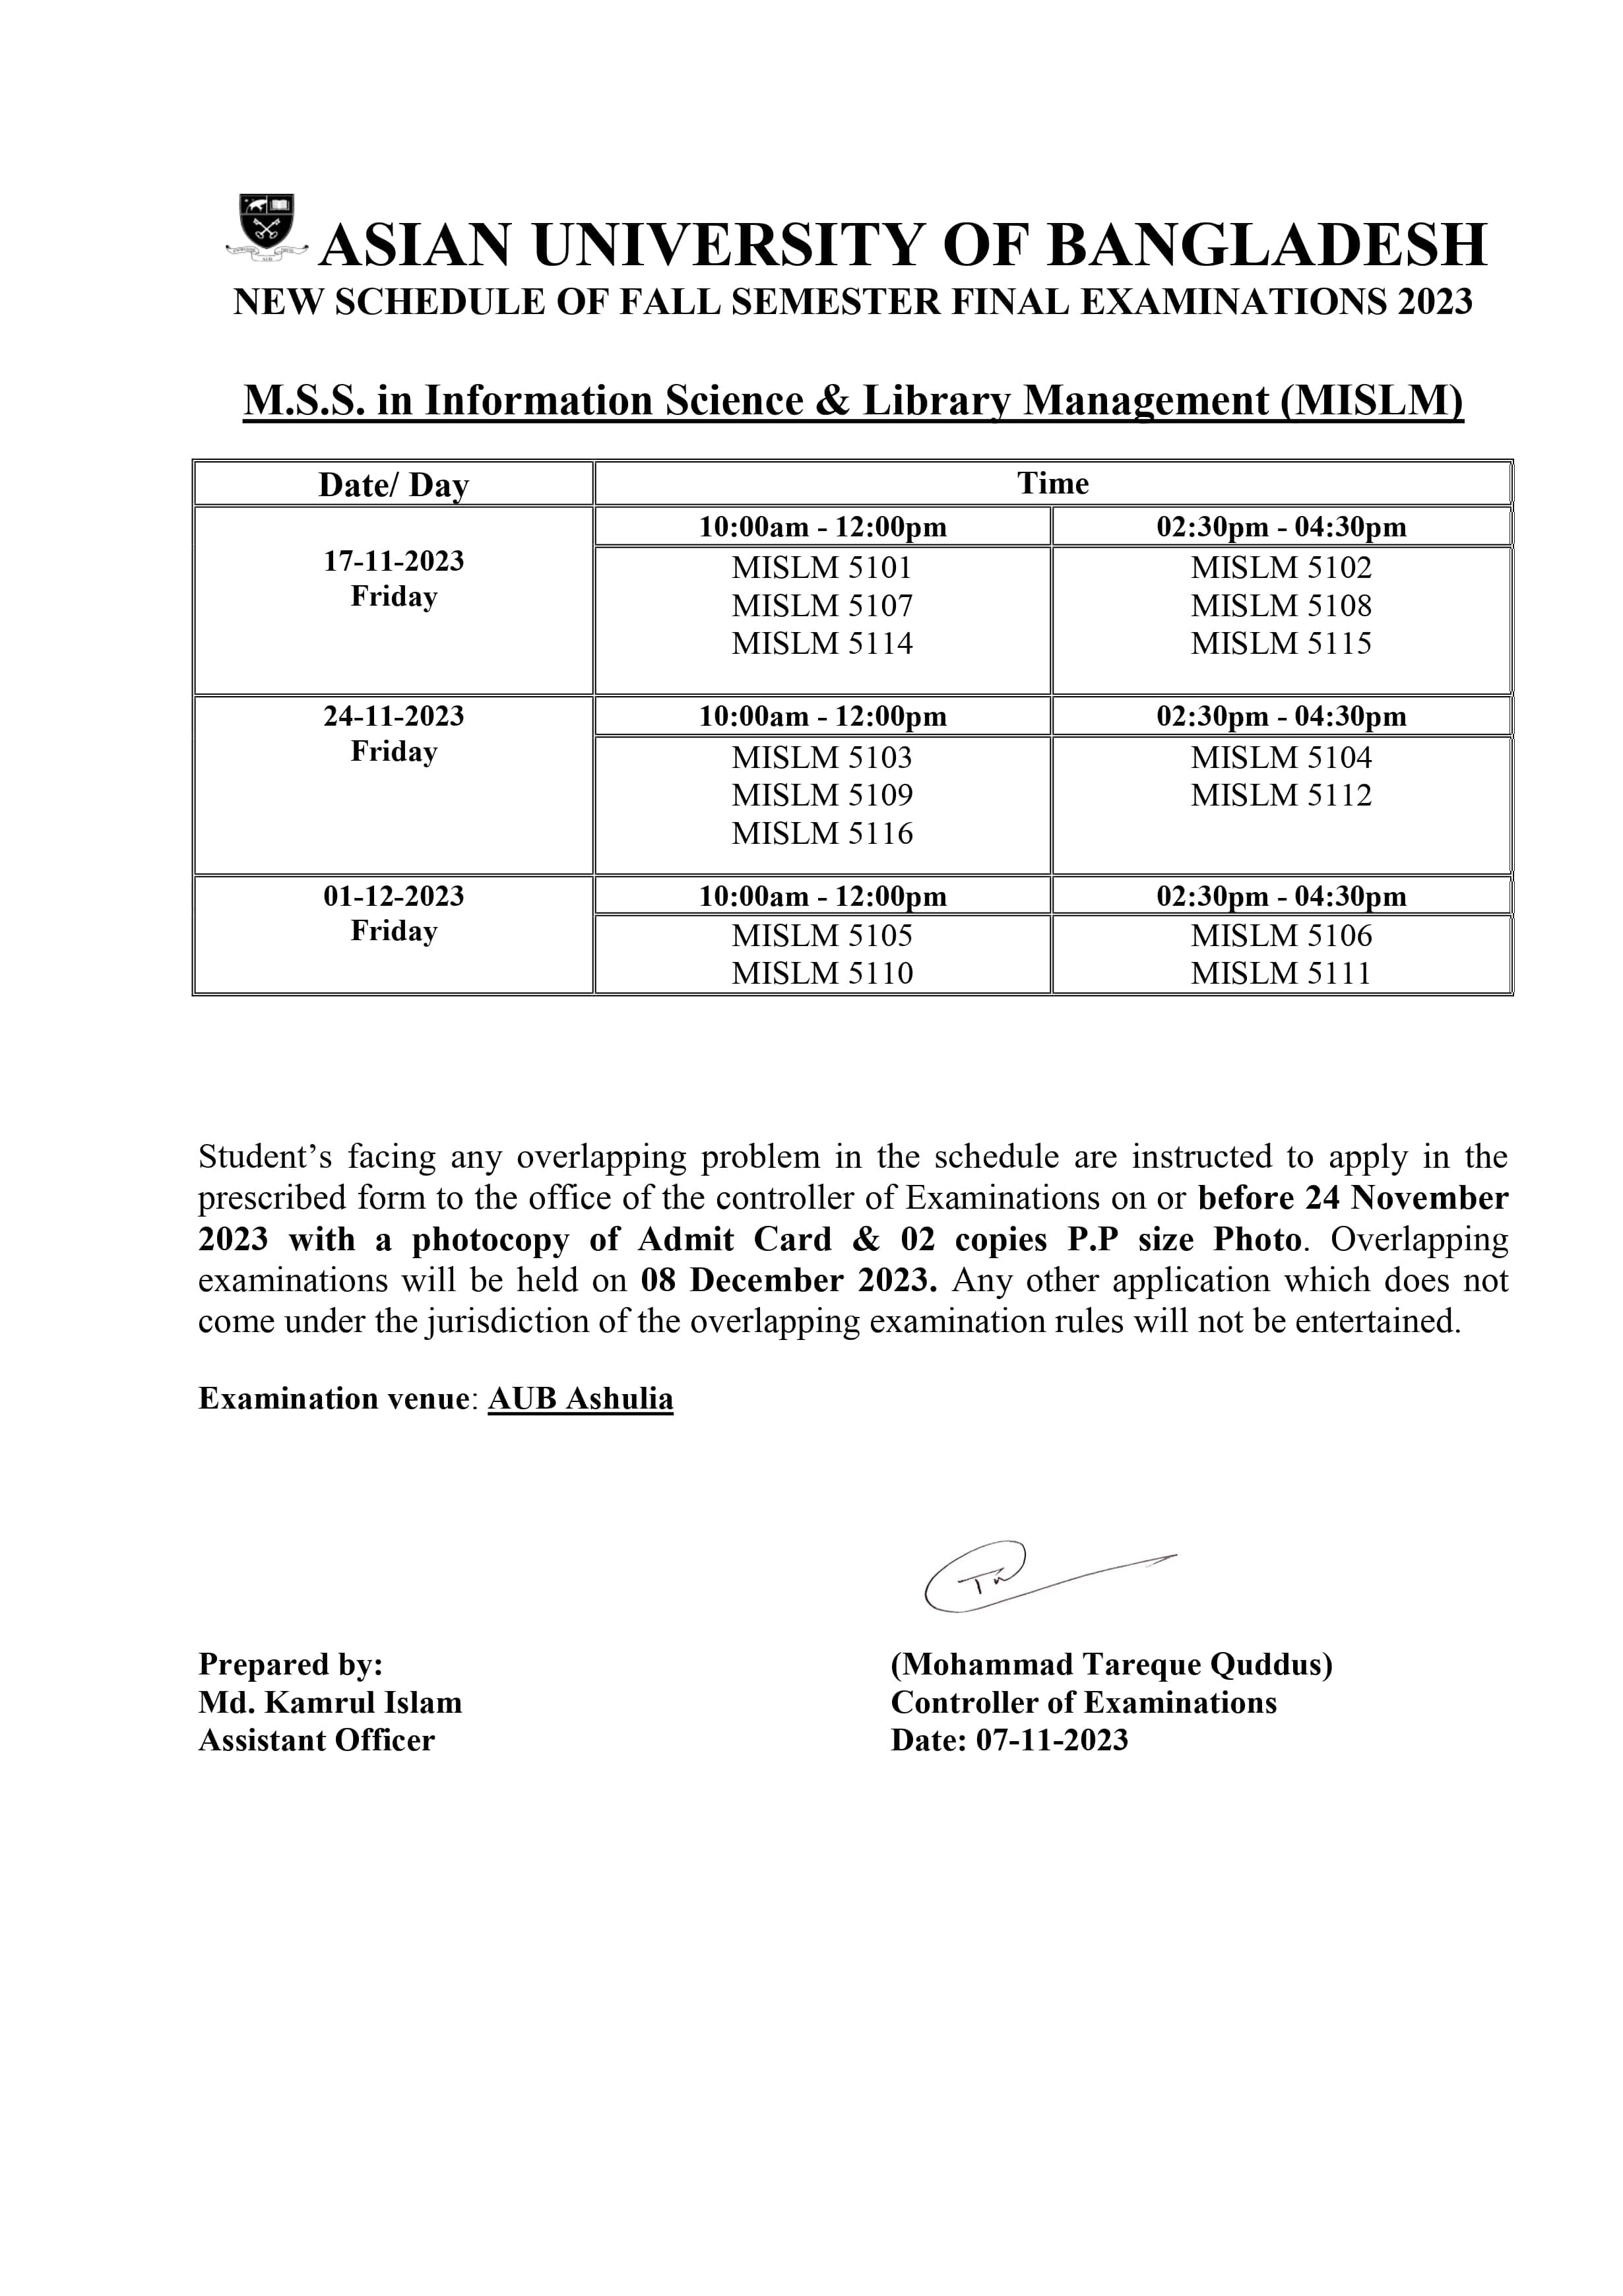 Fall 2023 Semester Final Exam Routine - Department of Information Science & Library Management image